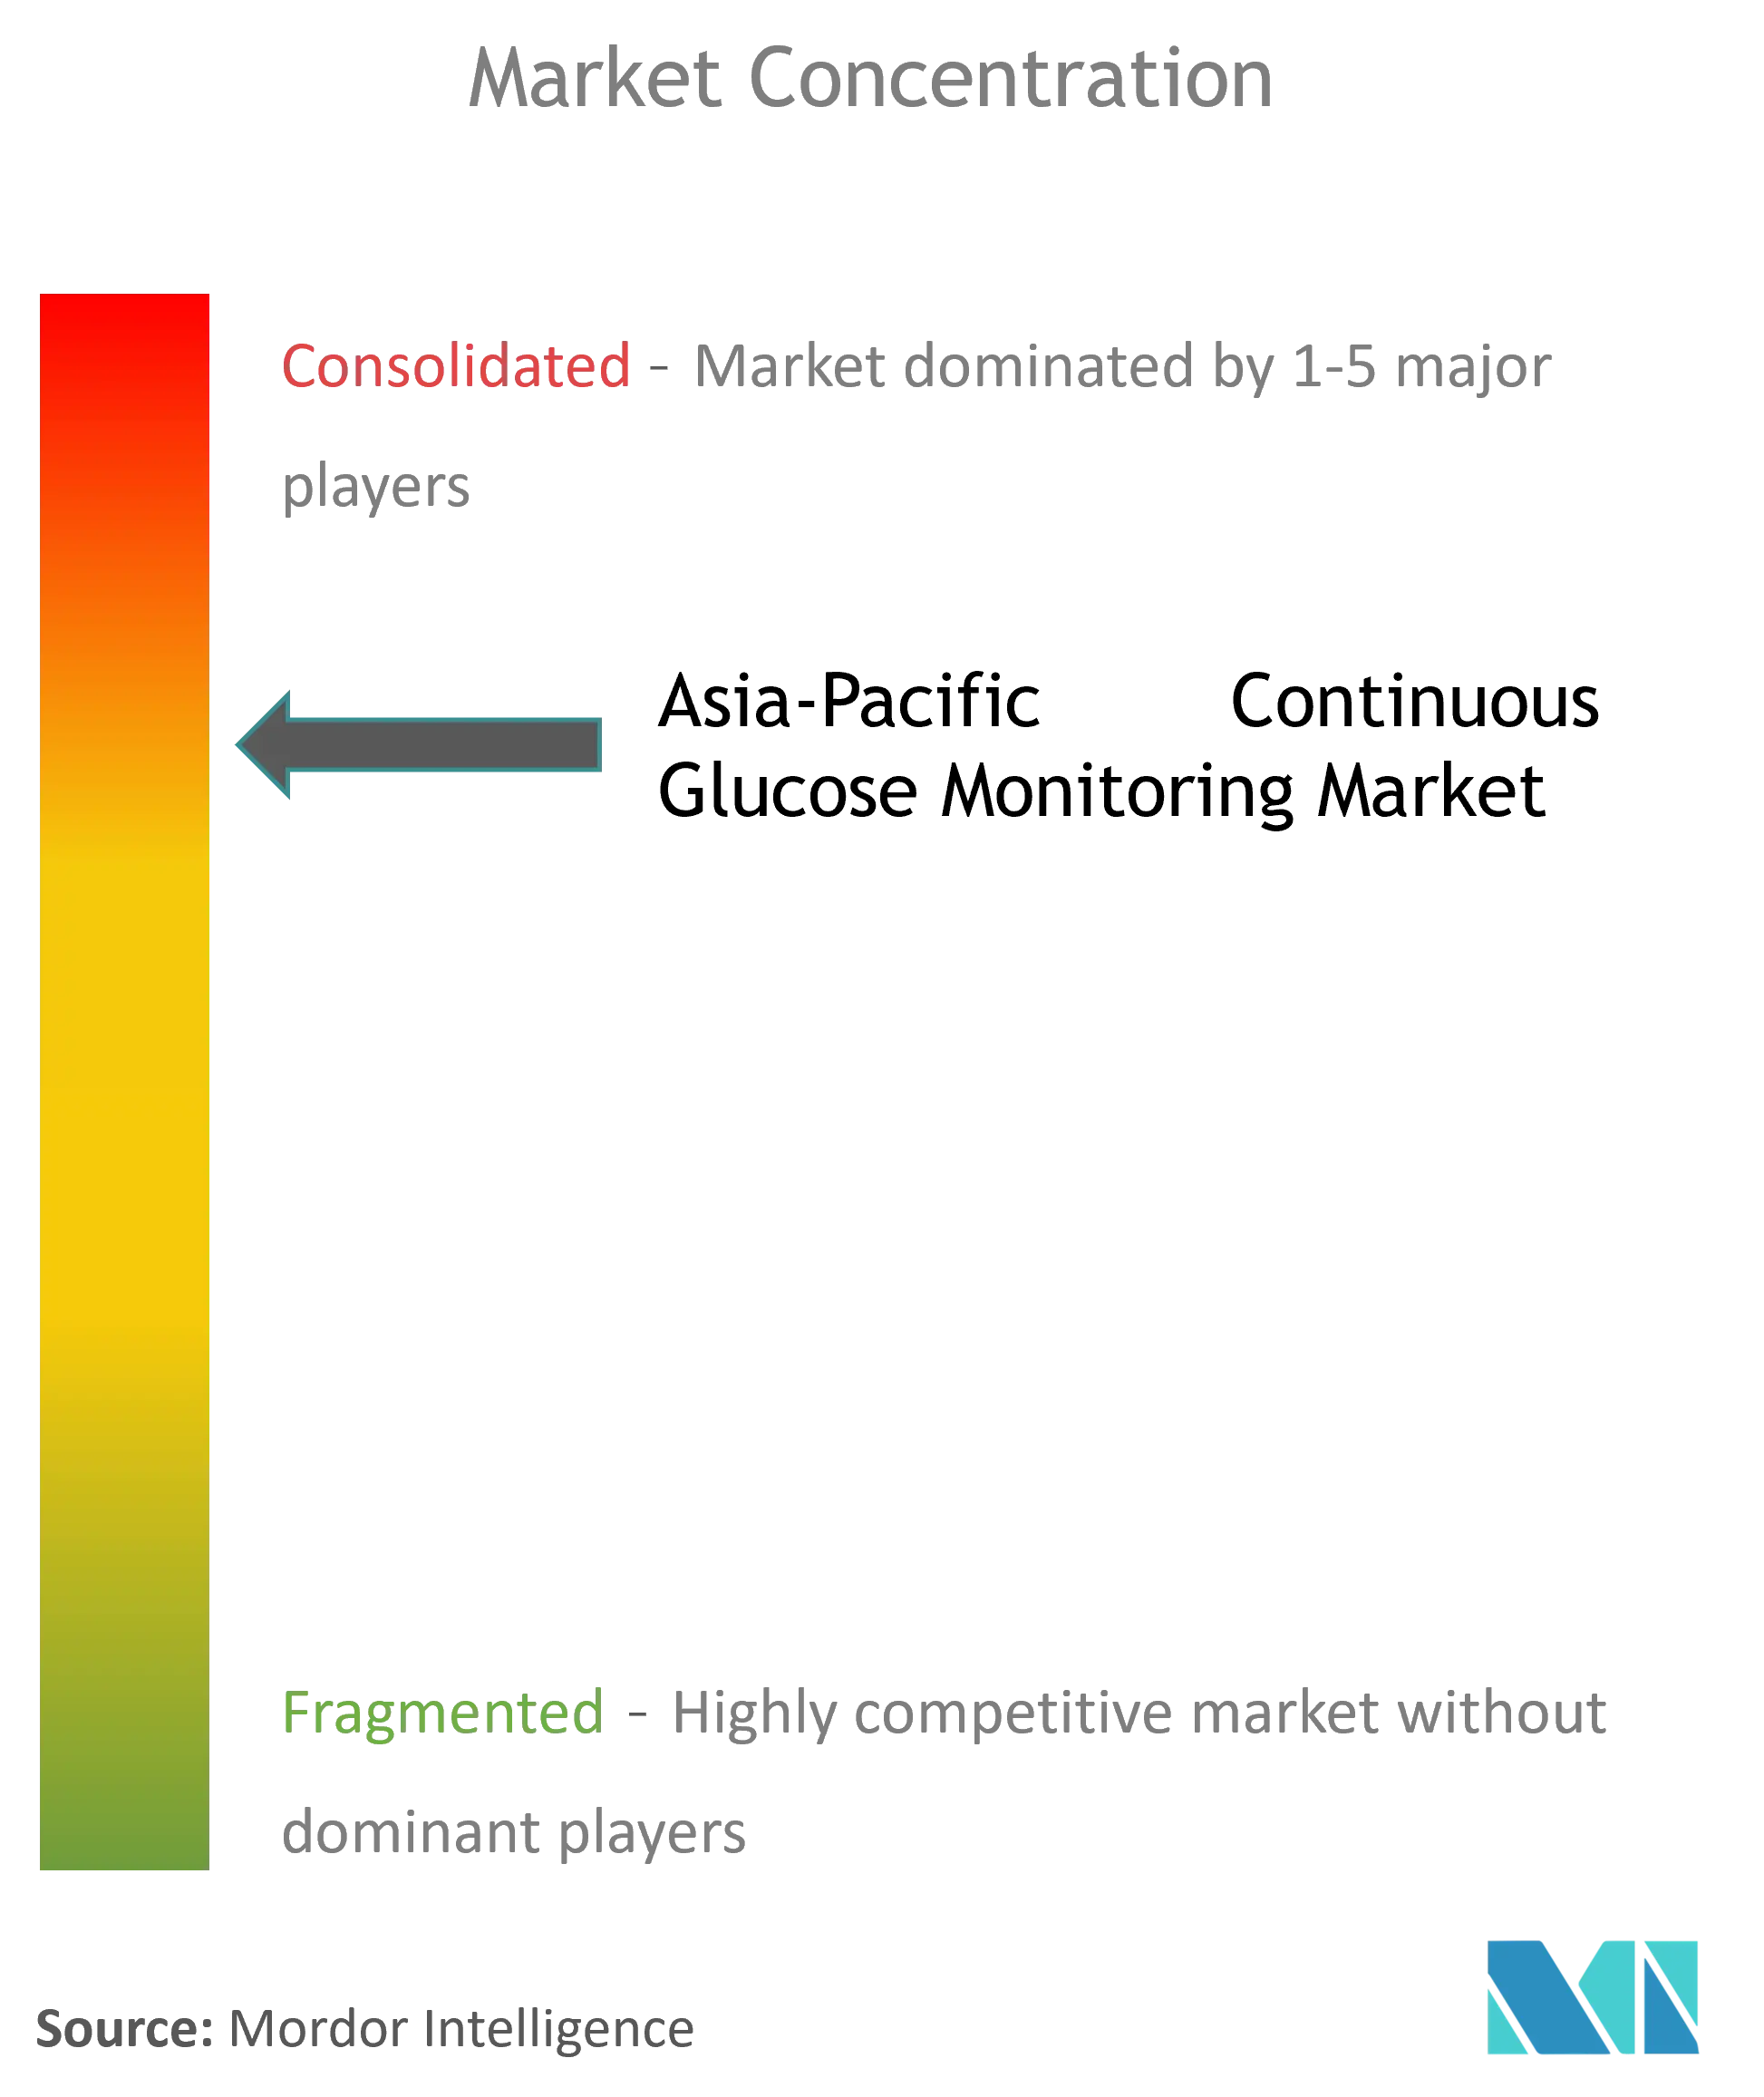 Asia-Pacific Continuous Glucose Monitoring Market Concentration